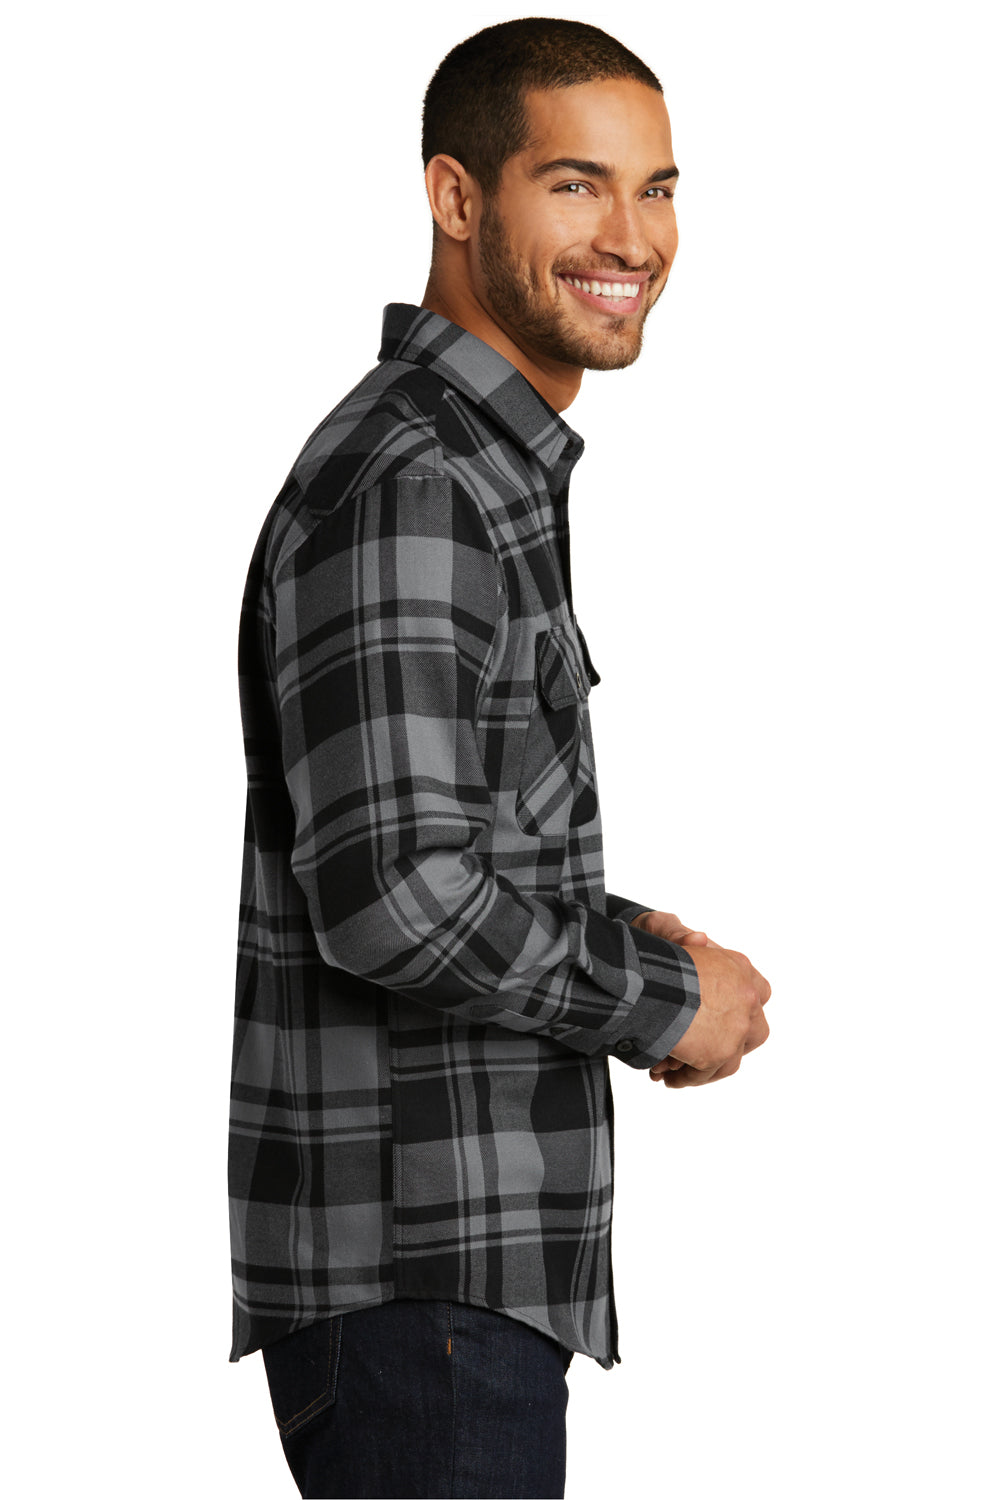 Port Authority W668 Mens Flannel Long Sleeve Button Down Shirt w/ Double Pockets Grey/Black Side